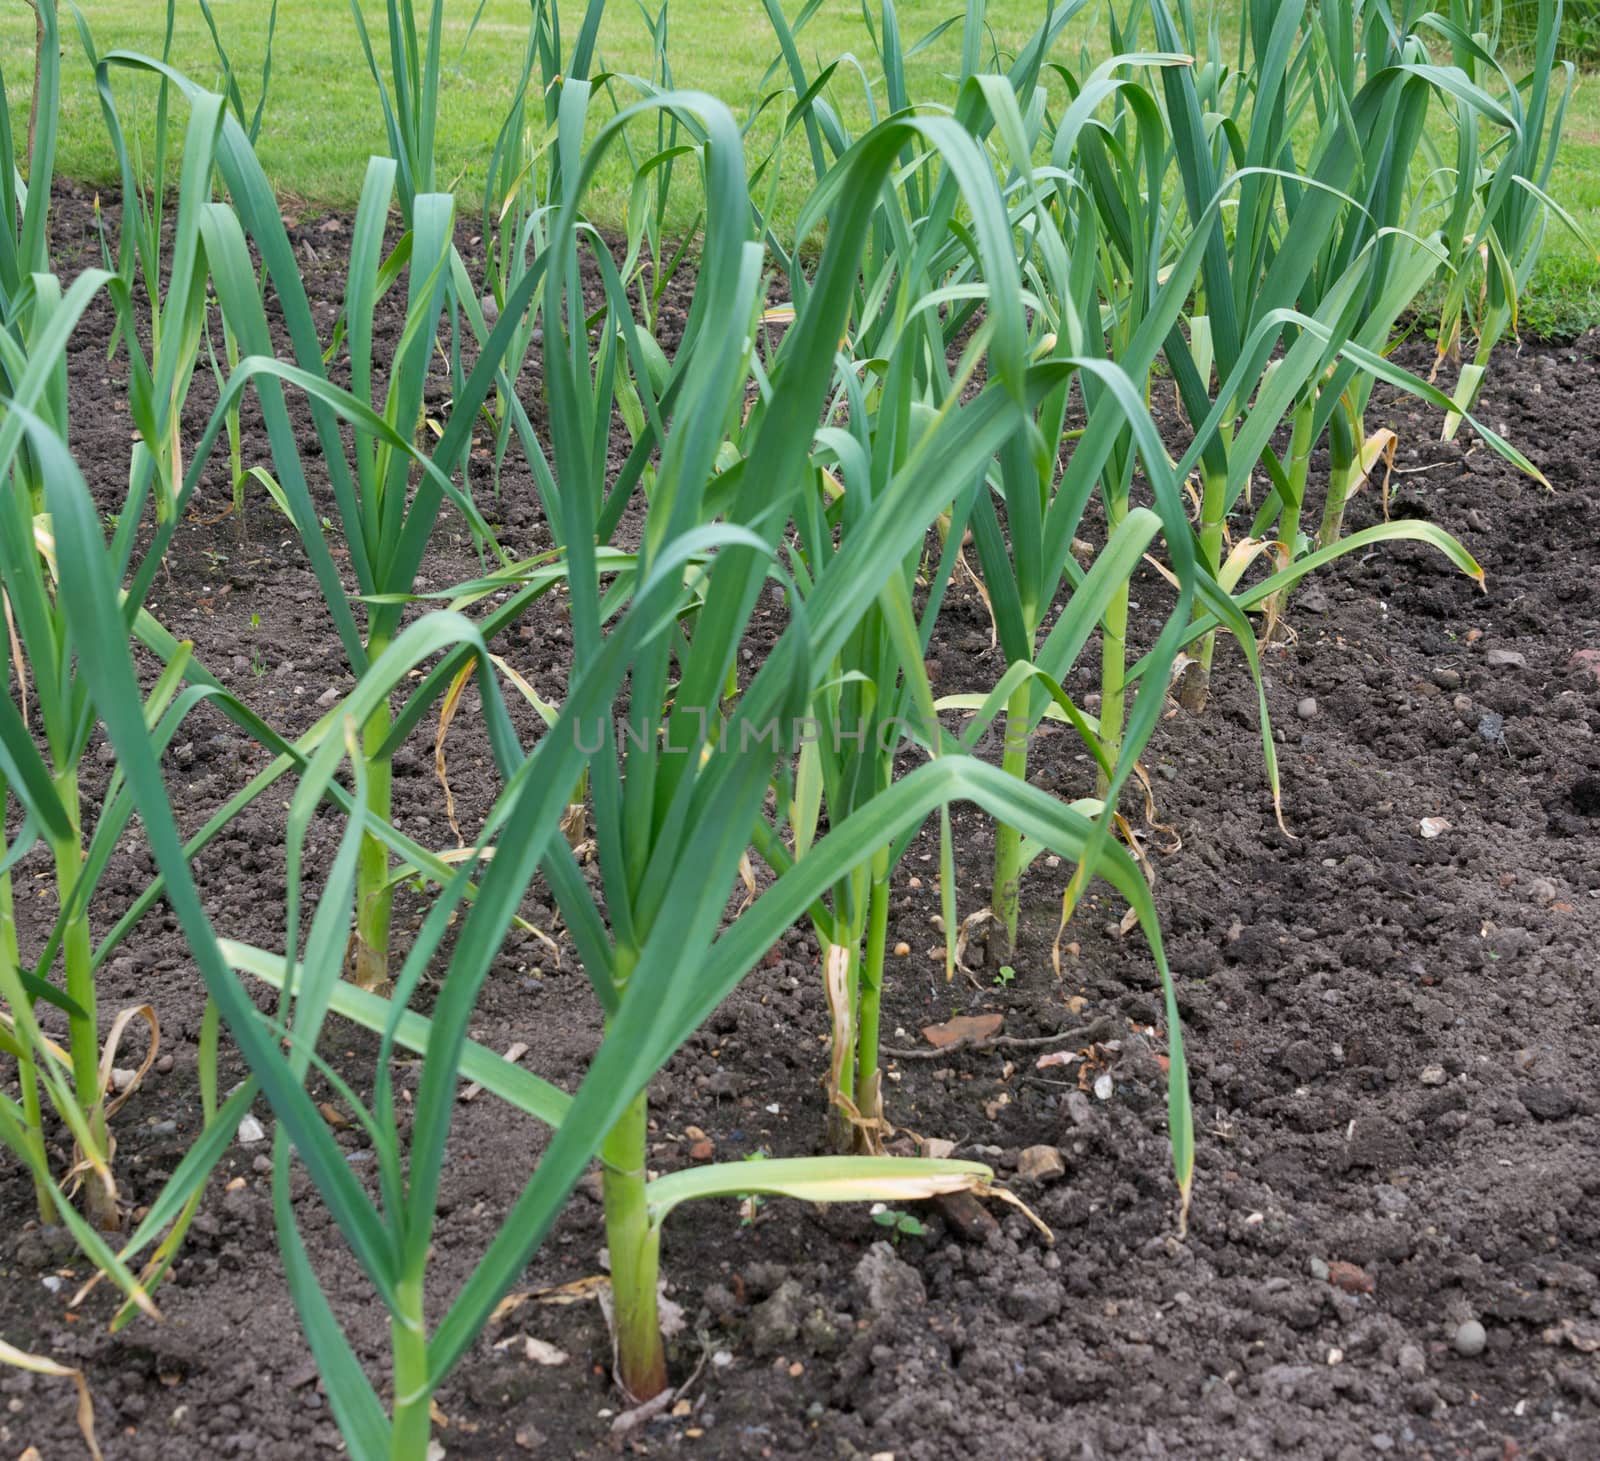 Garlic growing on Allotment by TimAwe